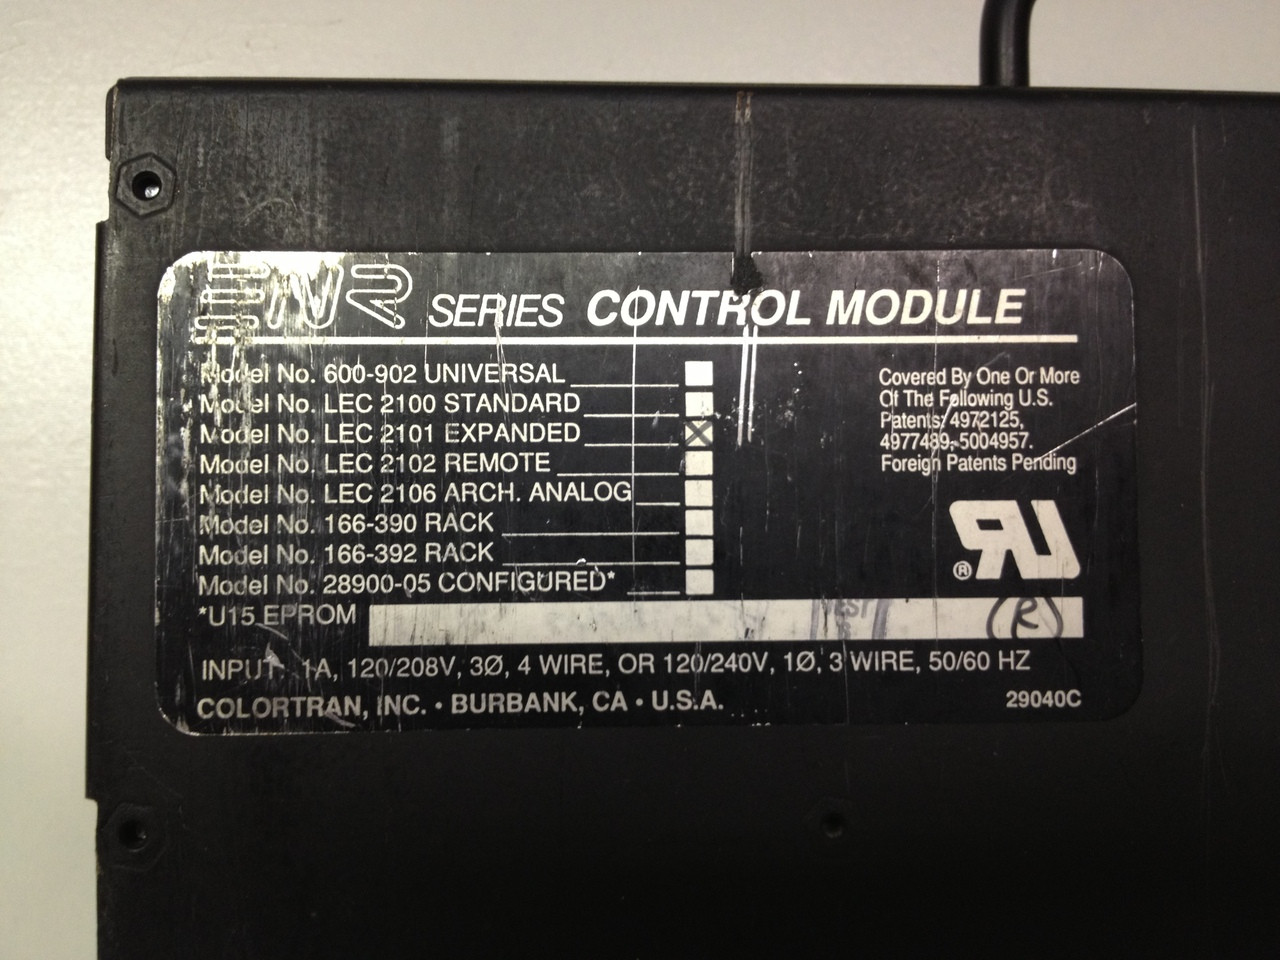 Leviton Colortran ENR Expanded Viewpoint LEC 2101 control module, conversion from architectural control to remote control